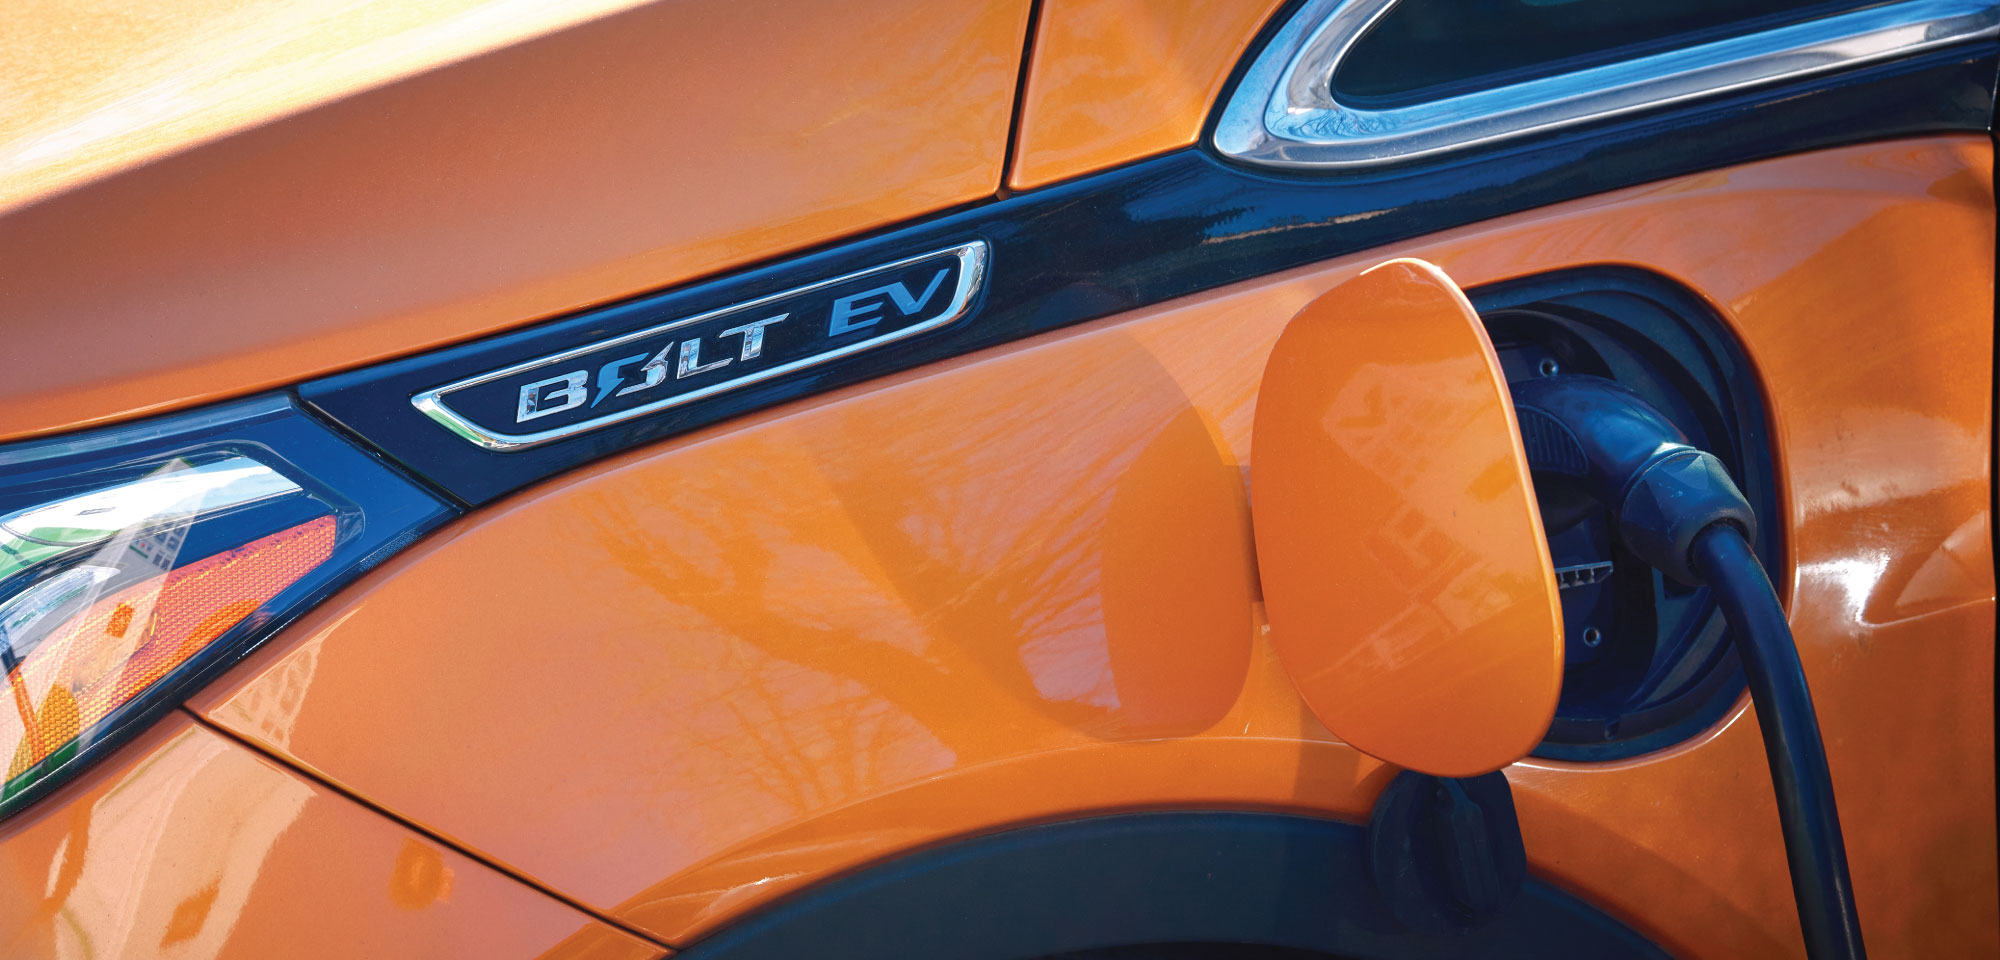 How much does it cost to charge a Chevy Bolt?